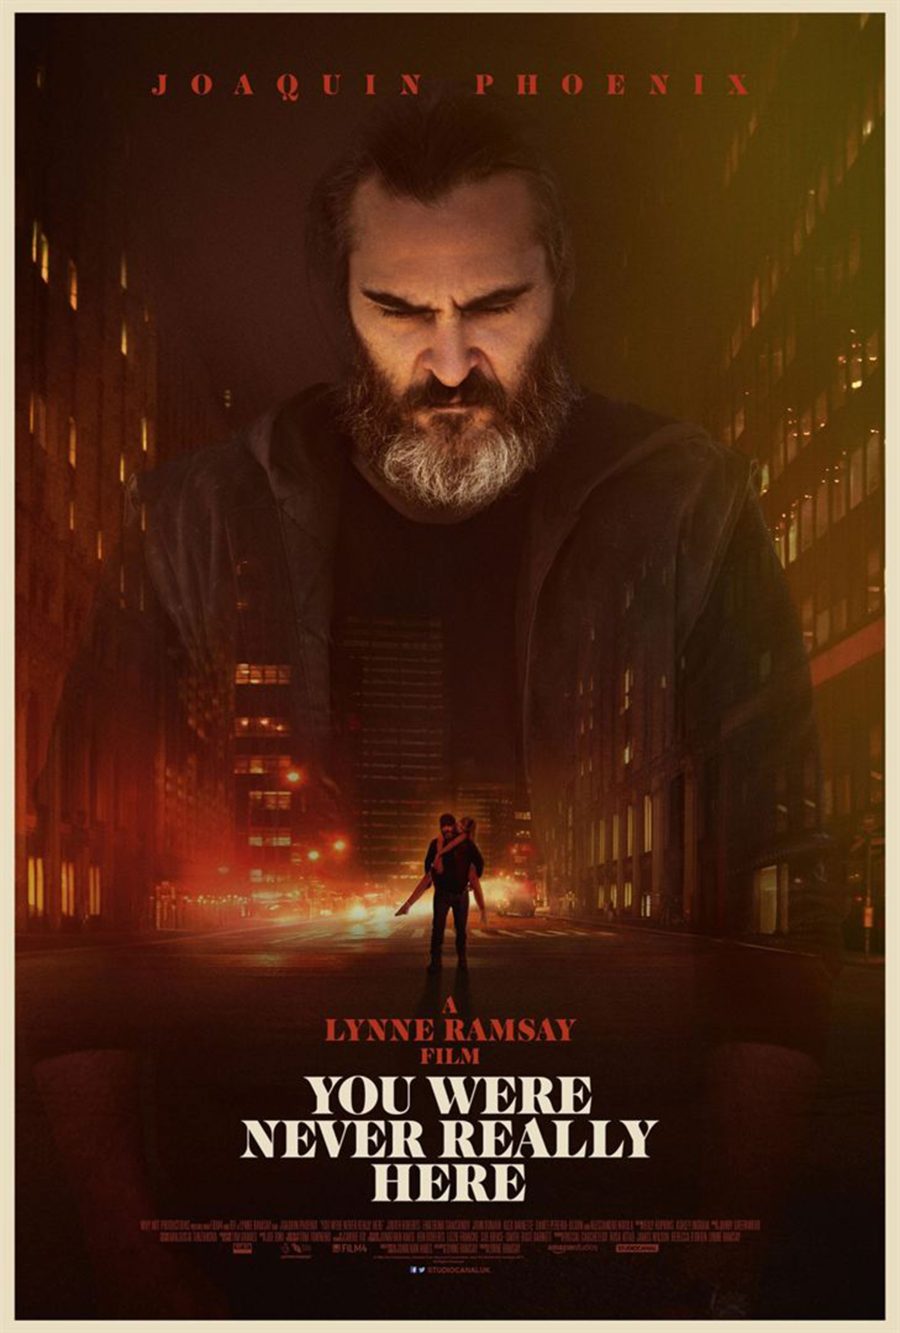 You Were Never Really Here (2017) Joaquin Phoenix Most Memorable Roles Through Years